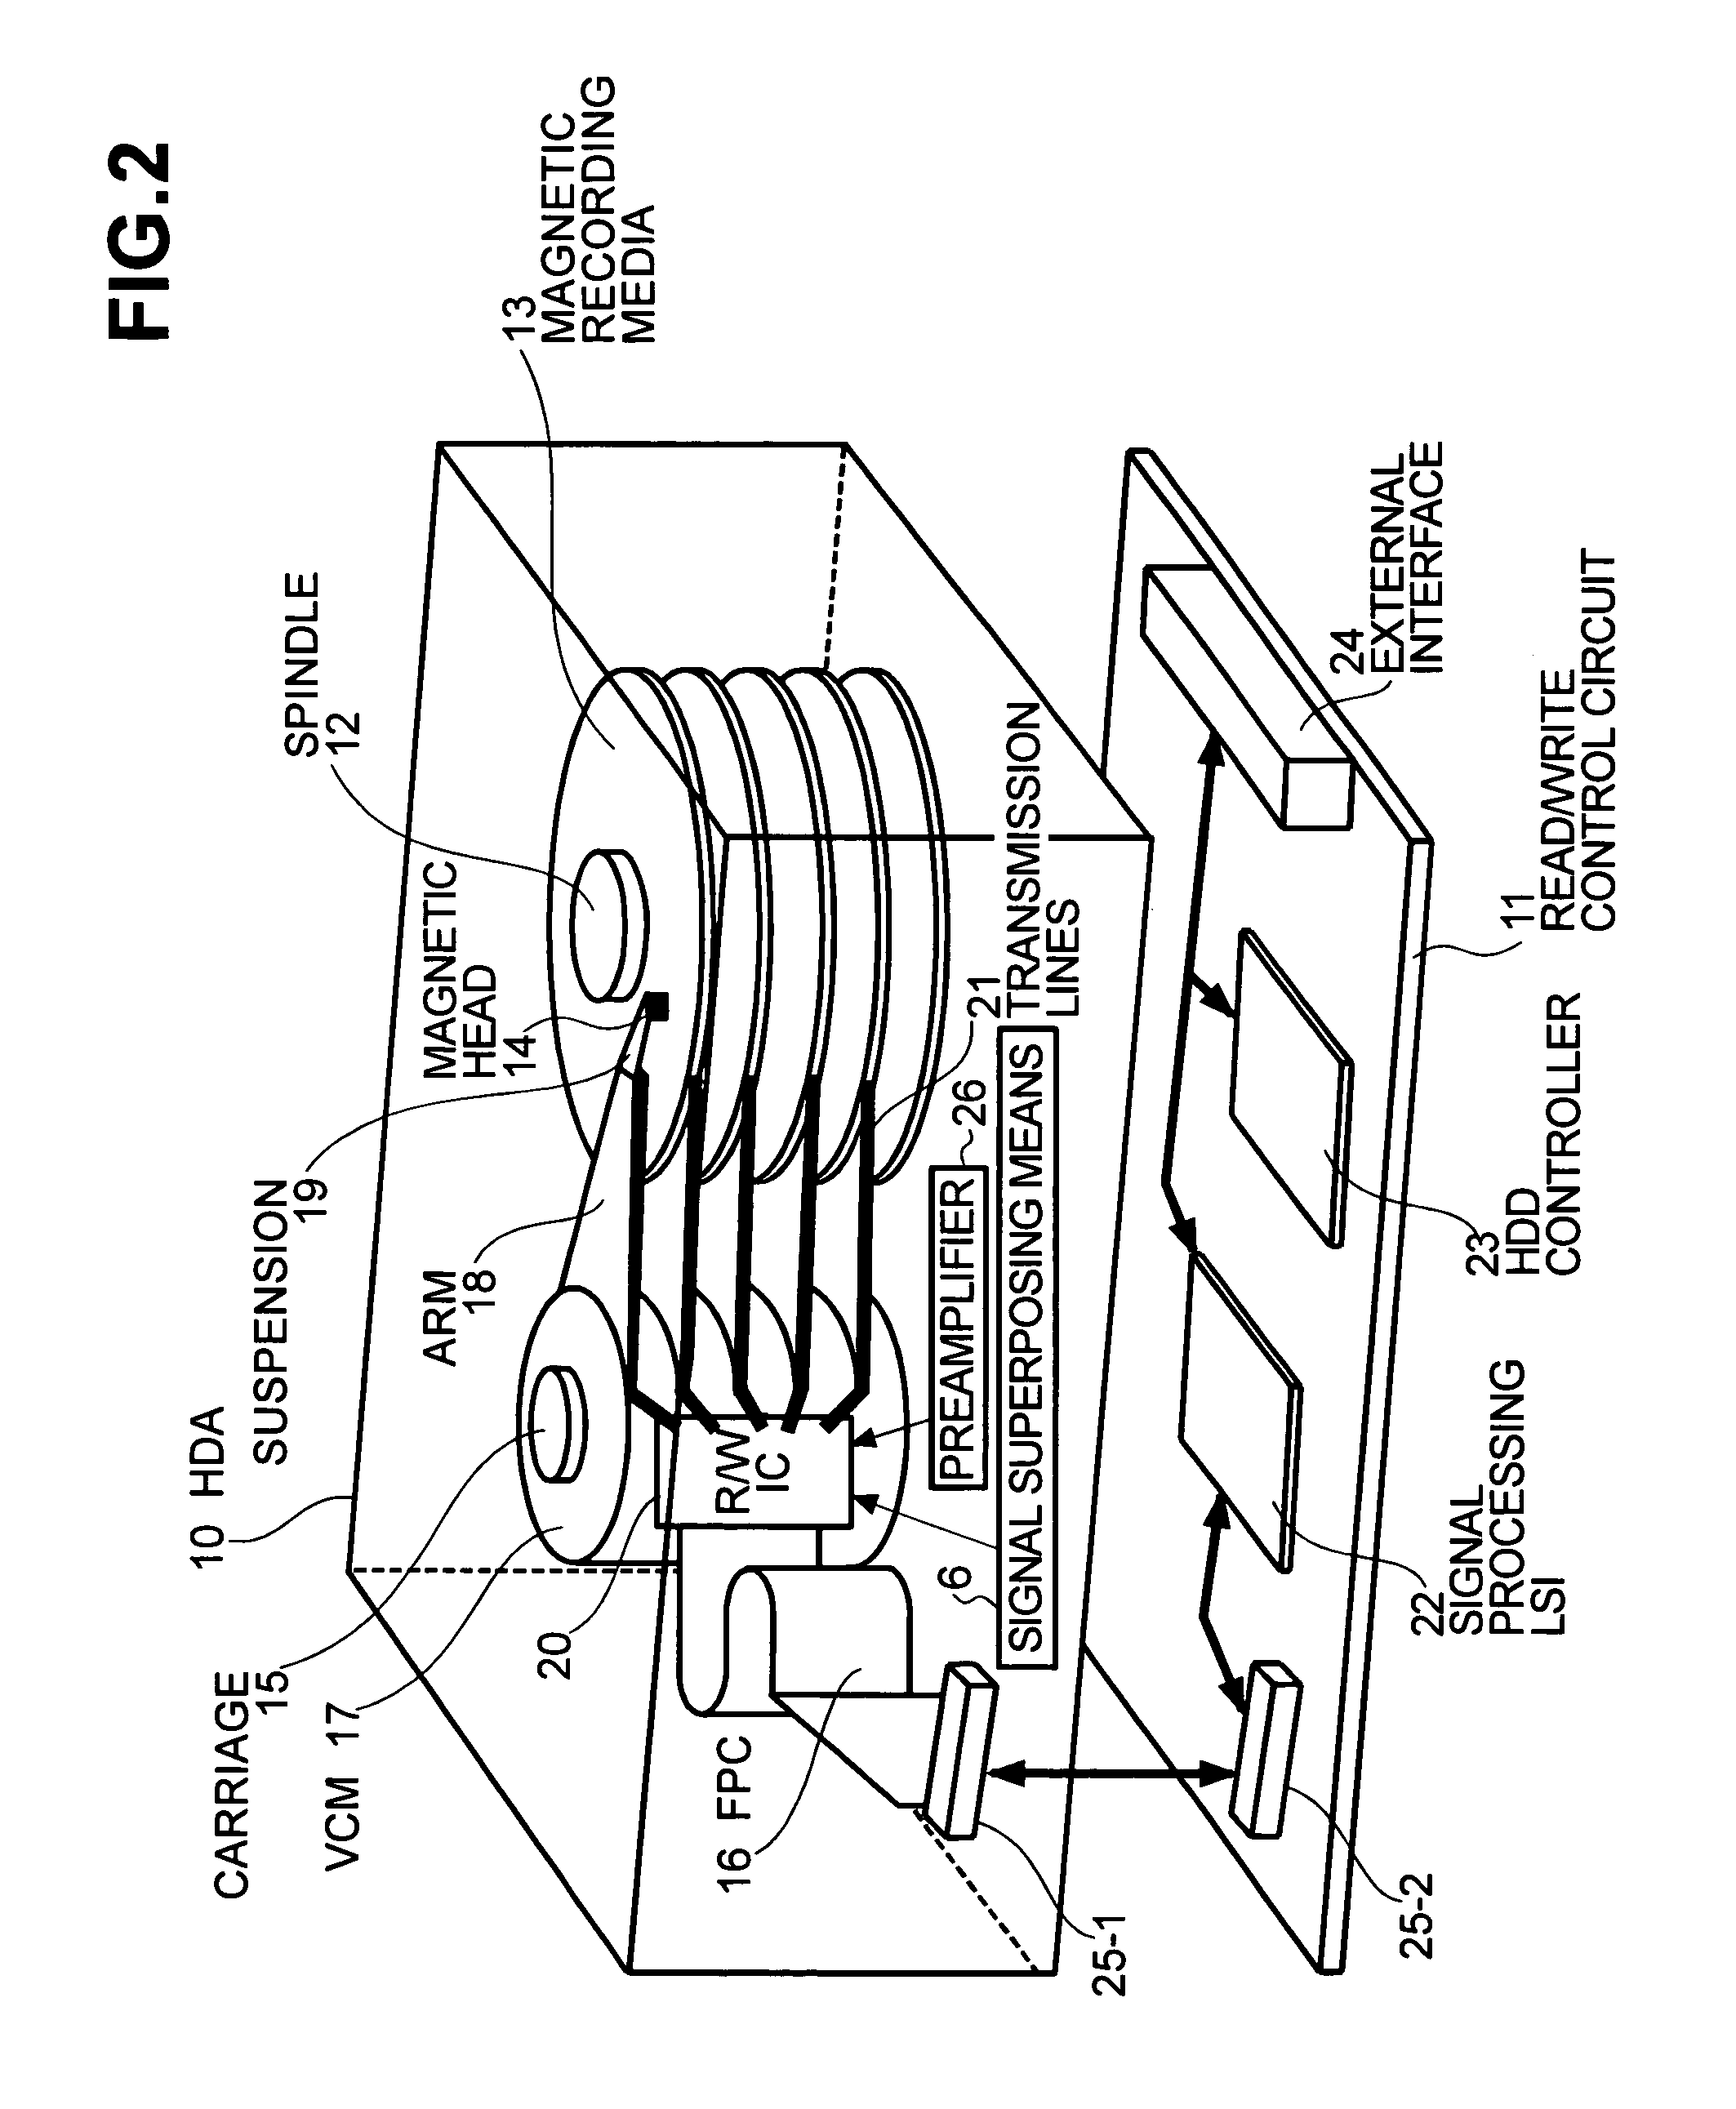 Magnetic disk drive reducing influence of rigidity of transmission lines on suspension